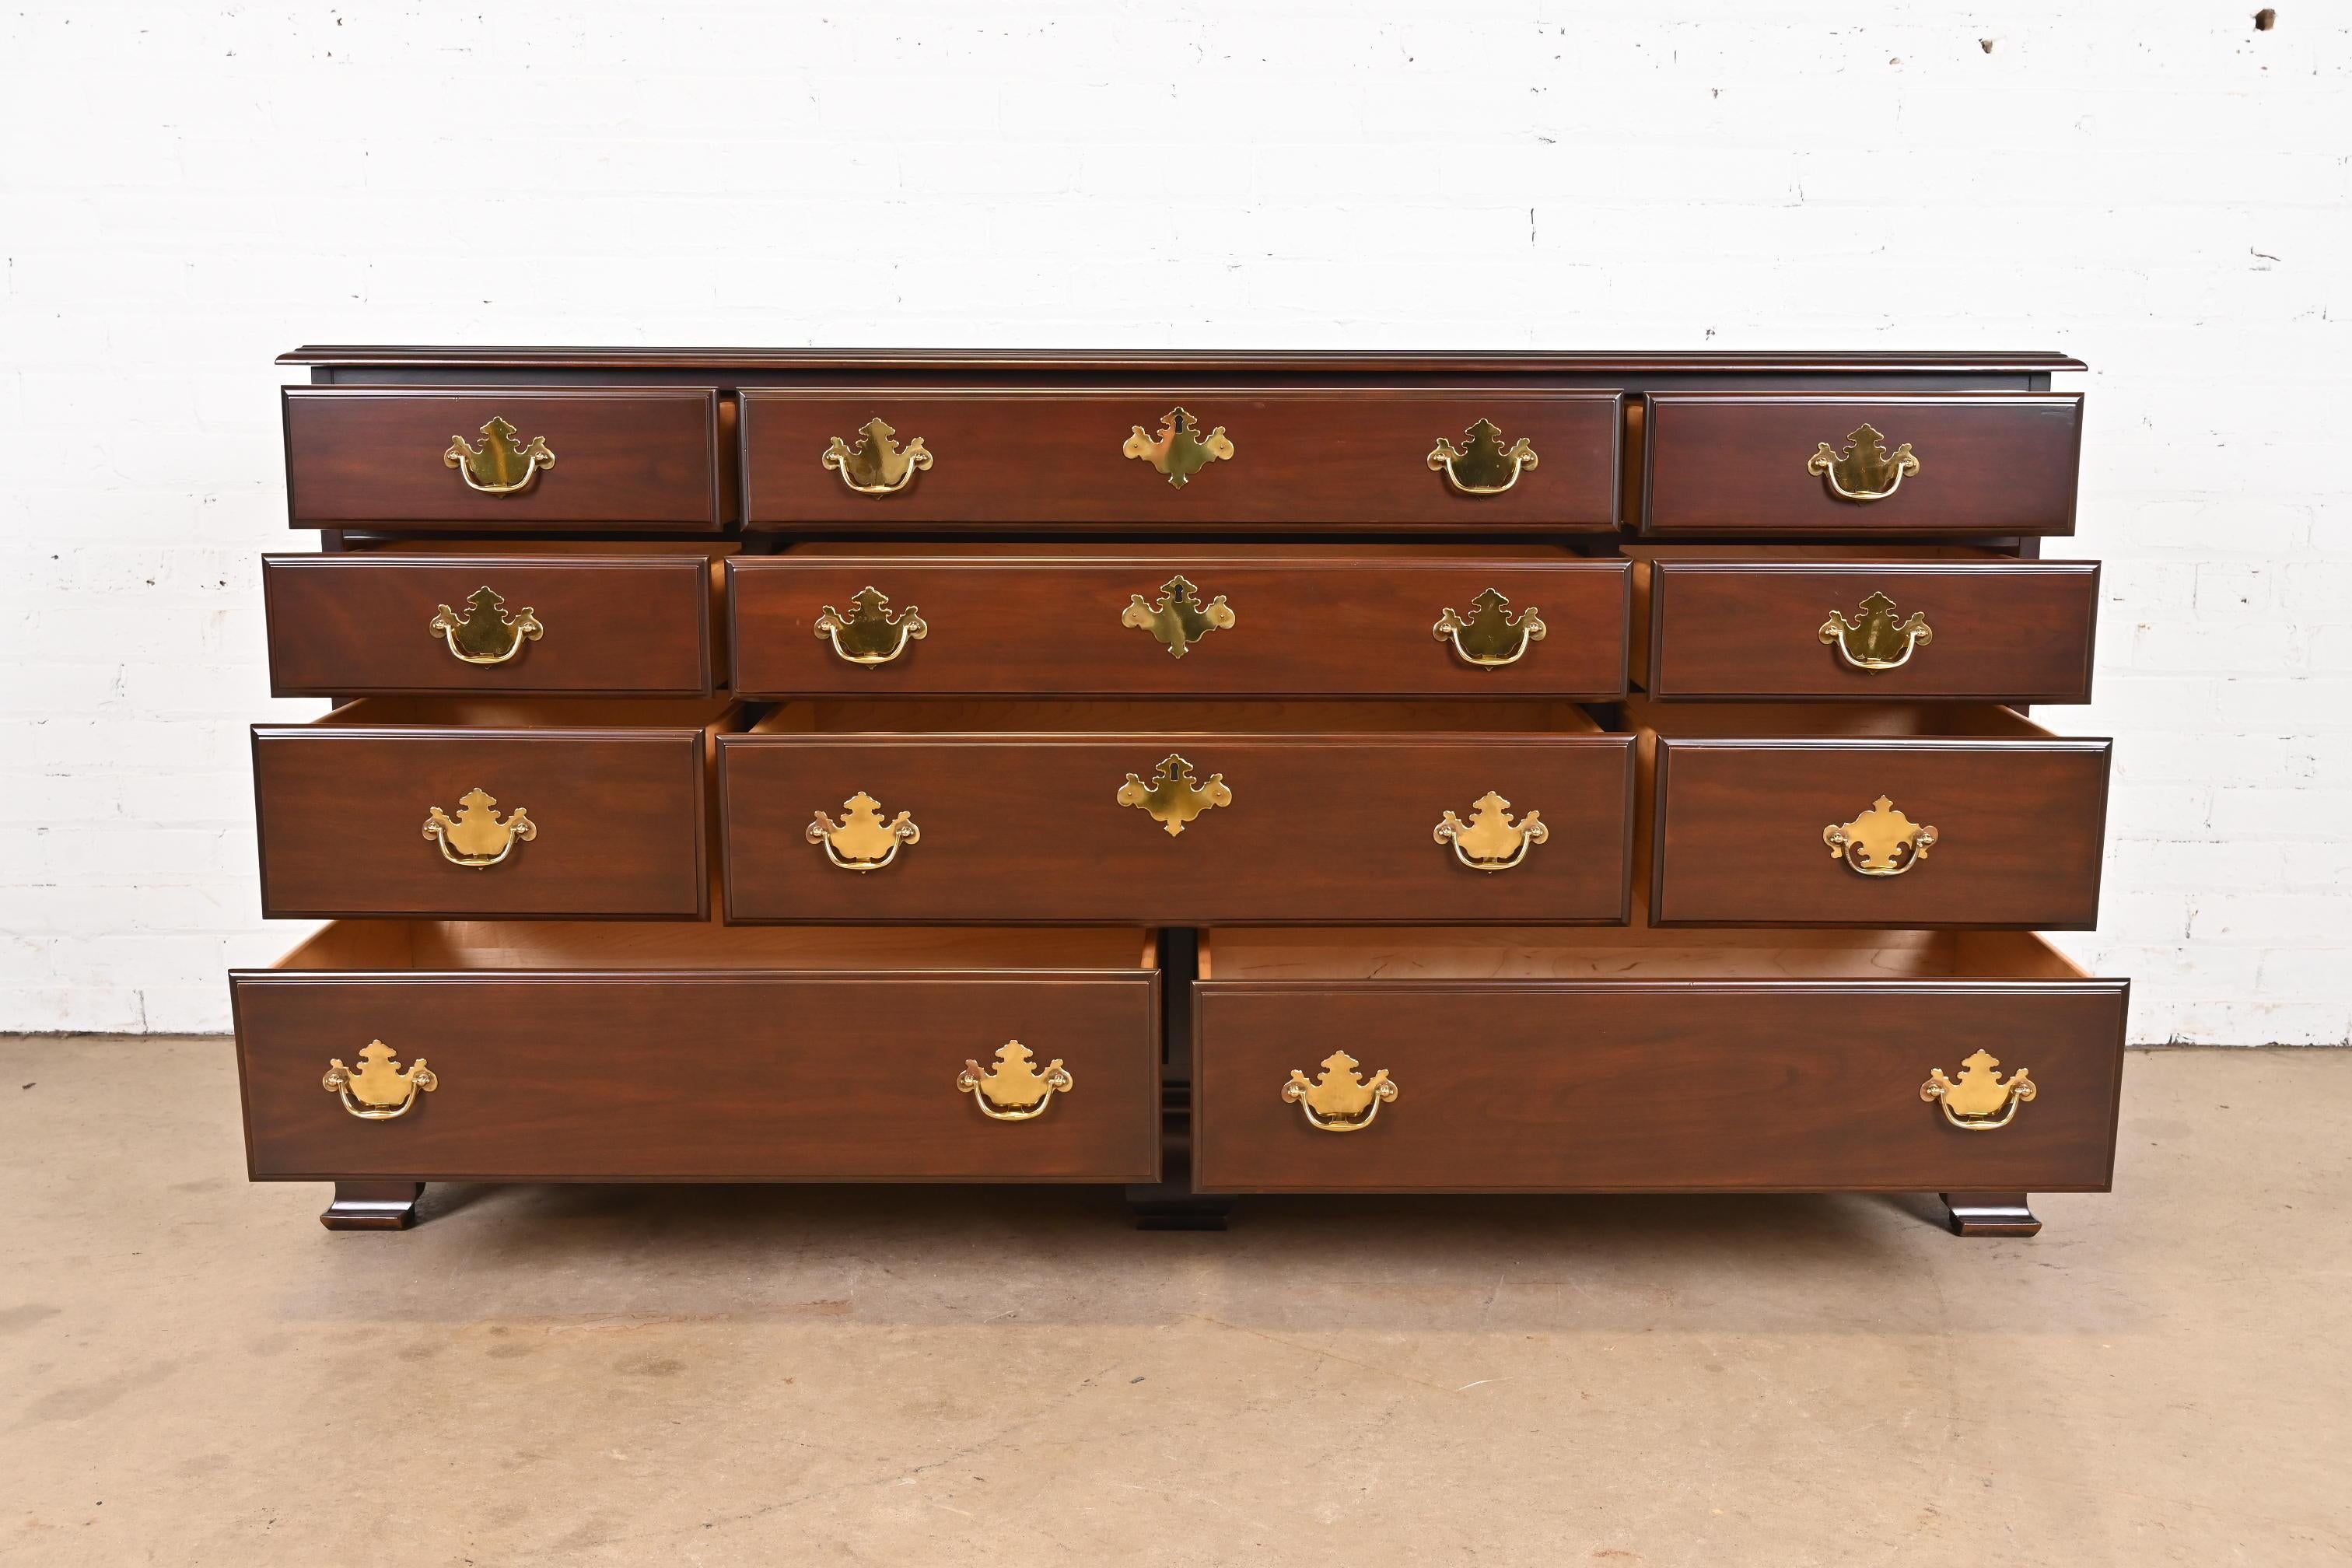 20th Century Harden Furniture Georgian Carved Solid Cherry Wood Long Dresser, Newly Restored For Sale